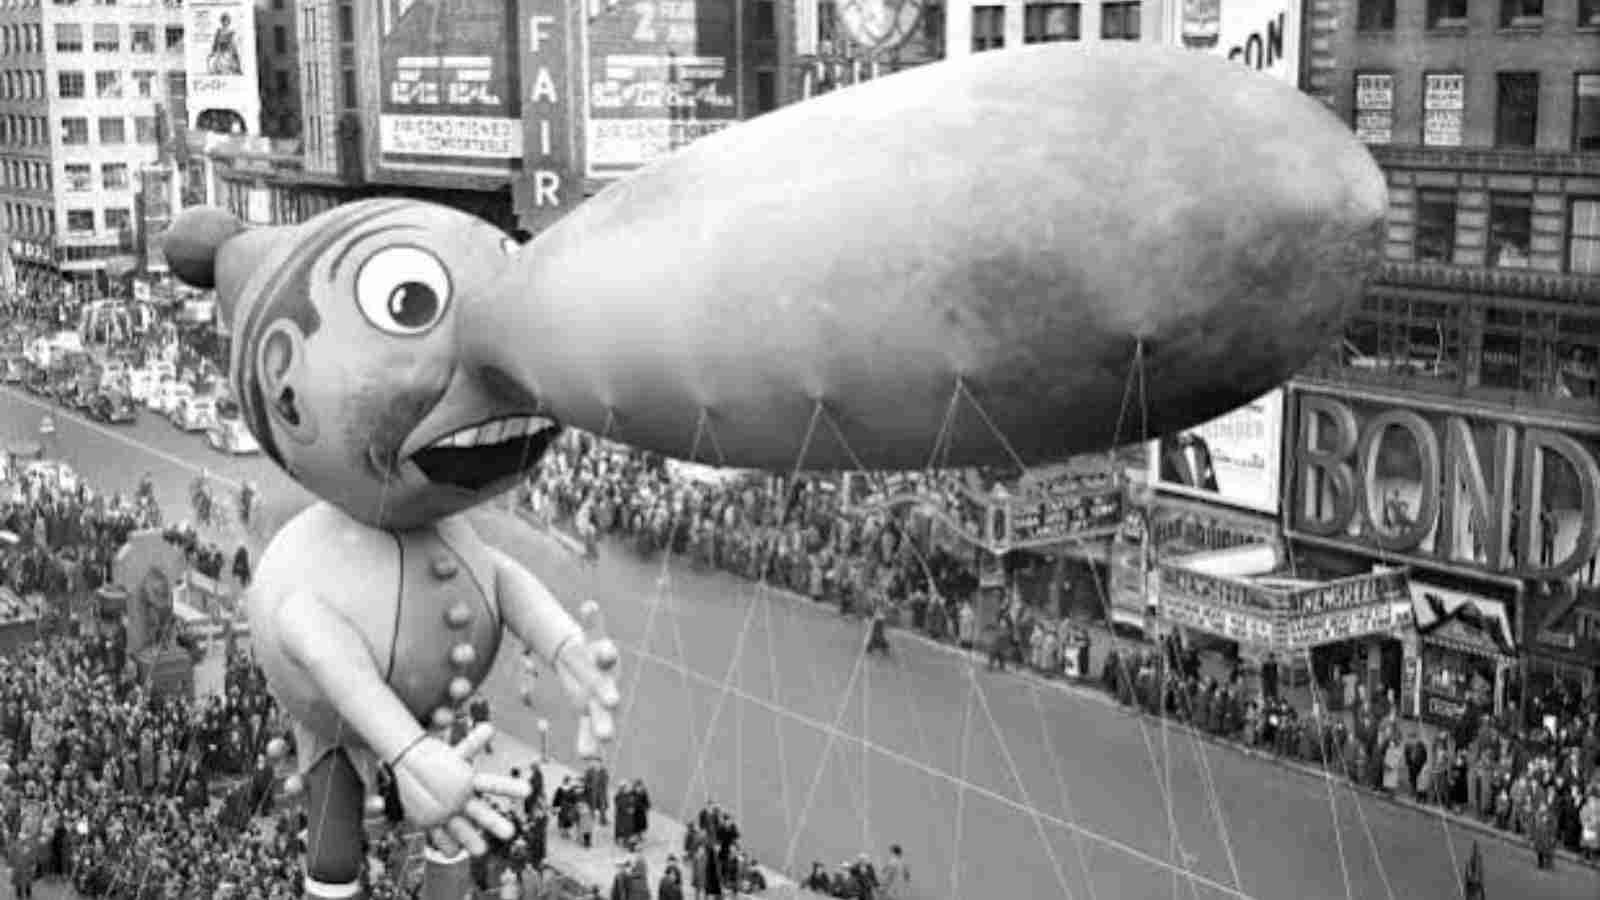 The history of Macy's Thanksgiving Parade